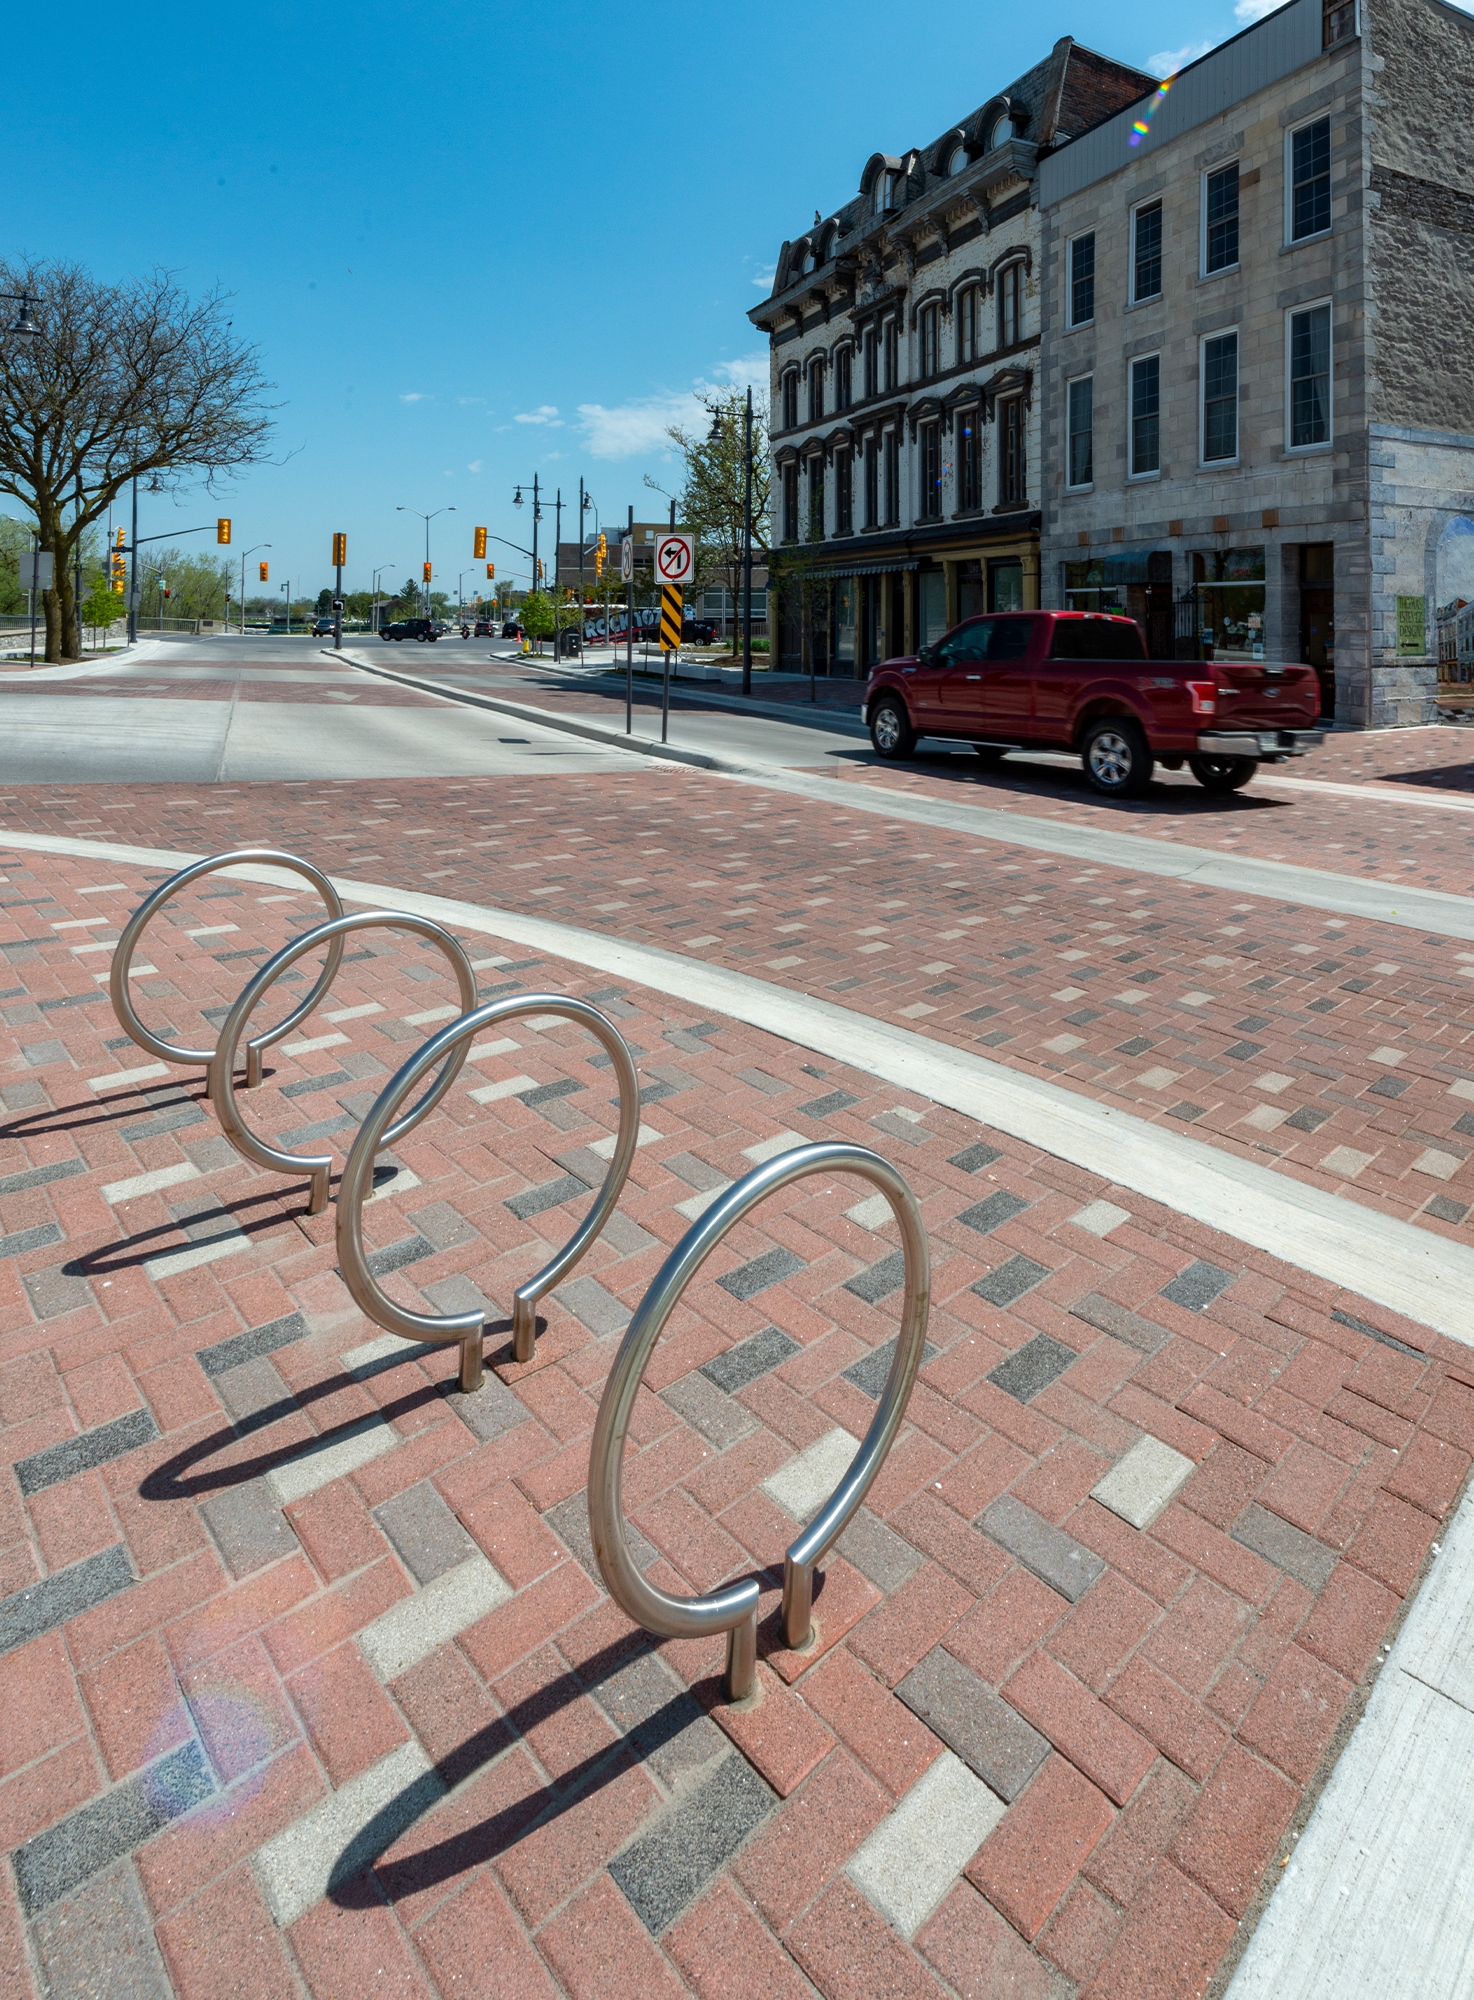 Bike racks sit on multicolor Series pavers that delineate pedestrian areas within a streetscape of a small historic town.